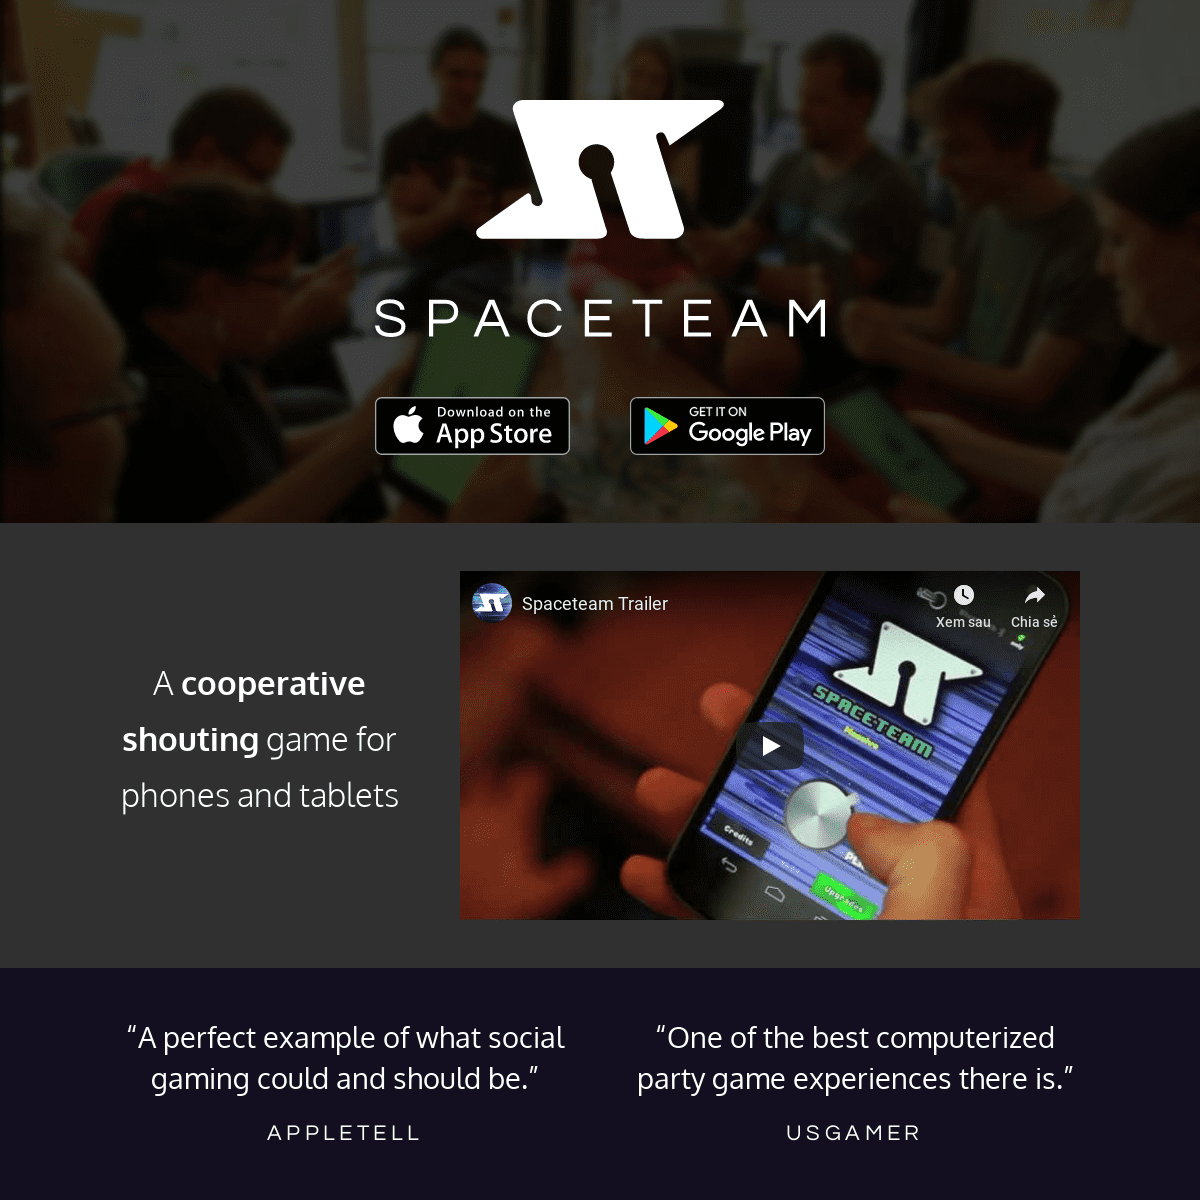 Spaceteam — A Game of Cooperative Shouting for Phones and Tablets